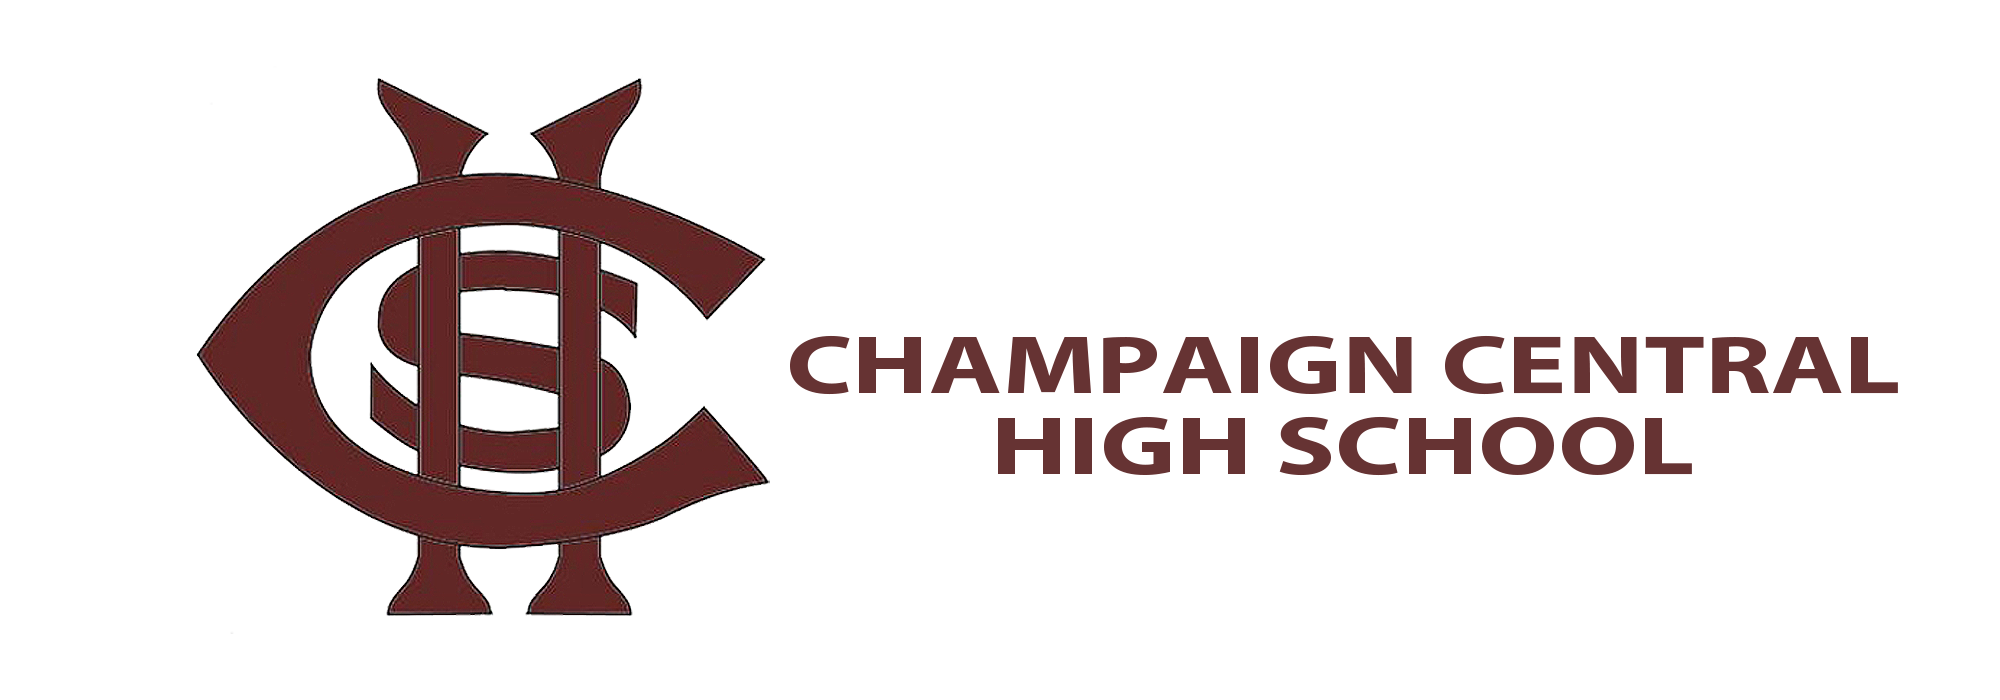 StageClip "Champaign Central High School"